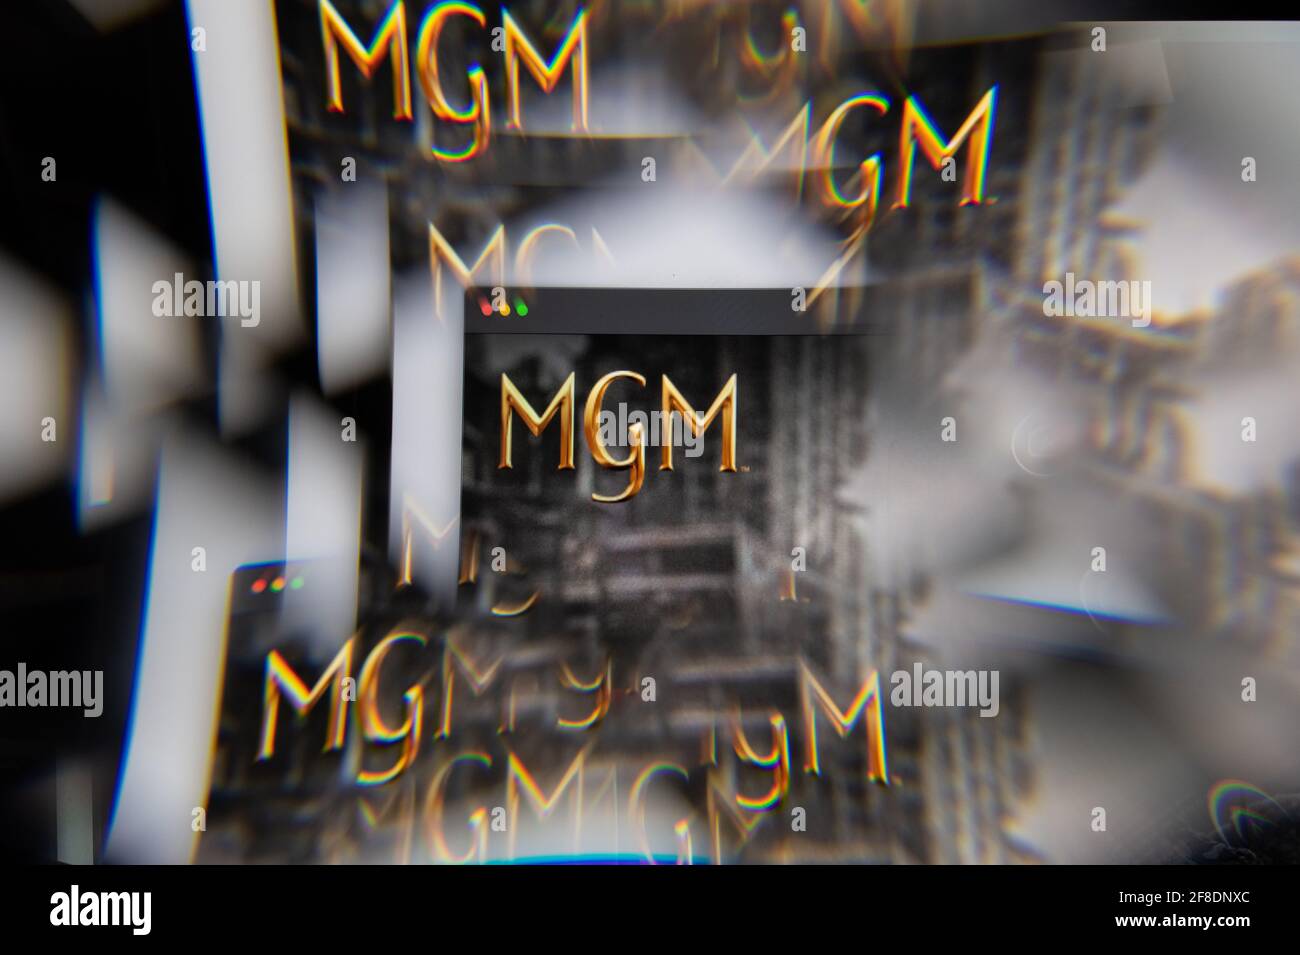 Milan, Italy - APRIL 10, 2021: MGM logo on laptop screen seen through an optical prism. Illustrative editorial image from MGM website. Stock Photo